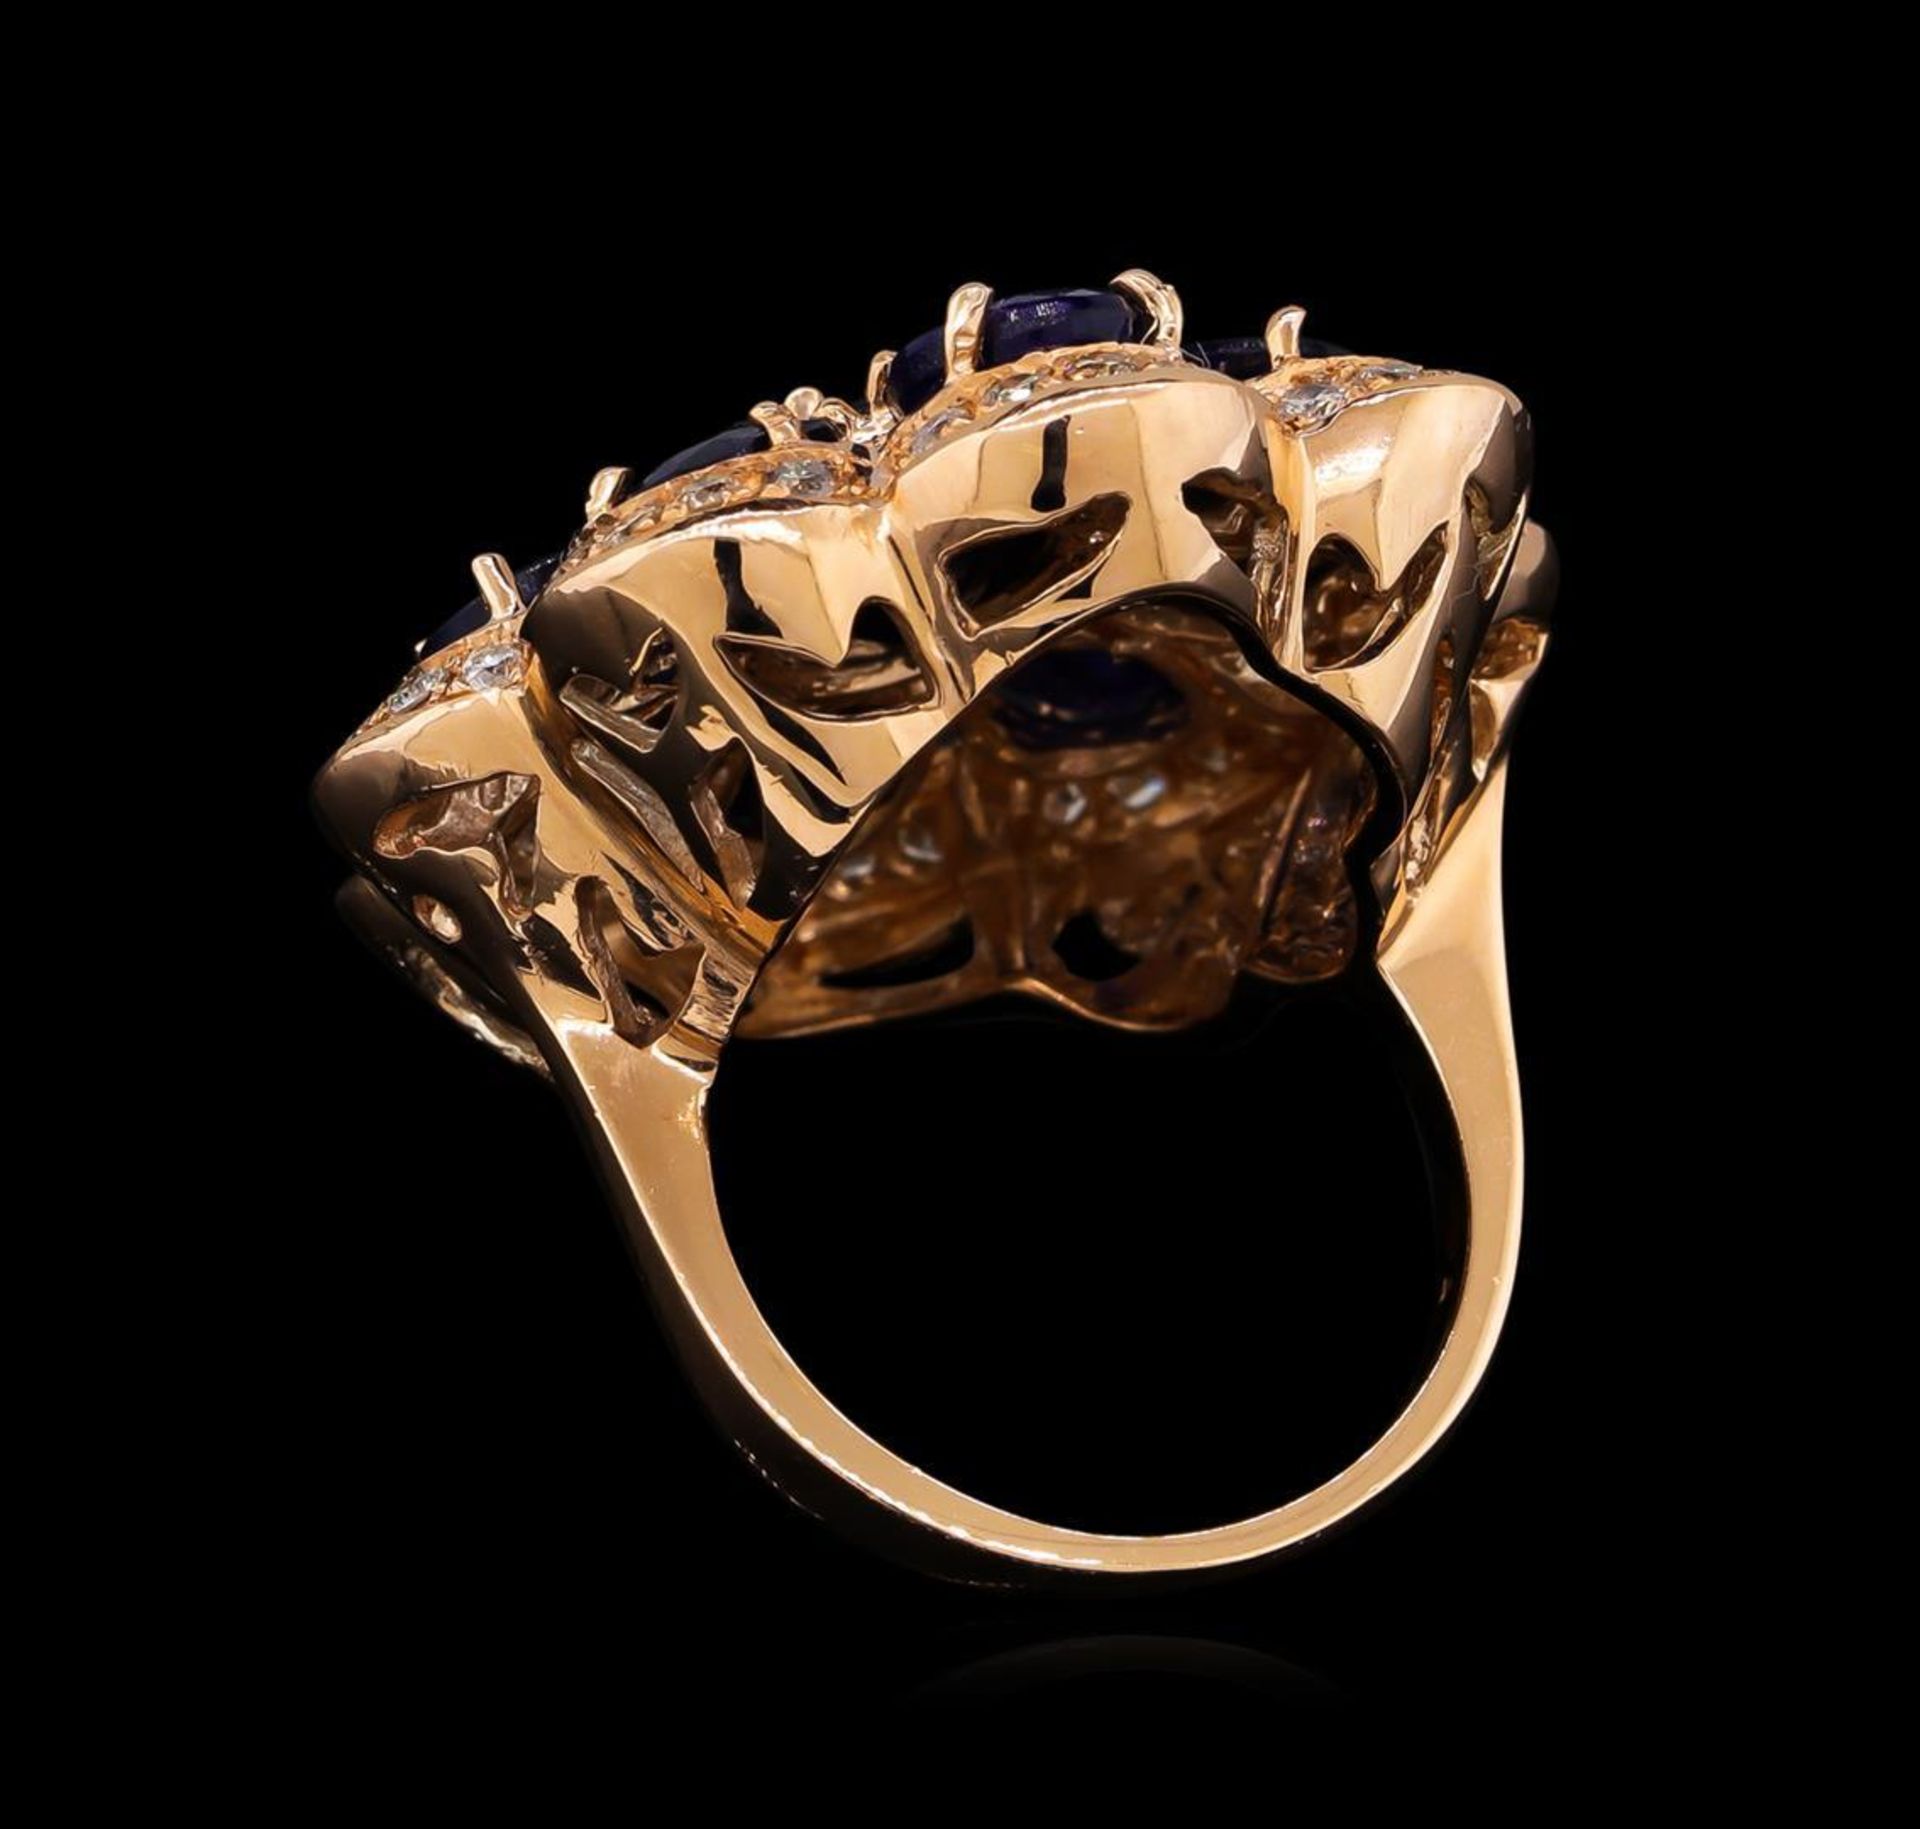 14KT Rose Gold 10.37 ctw Sapphire Ring - Image 3 of 5